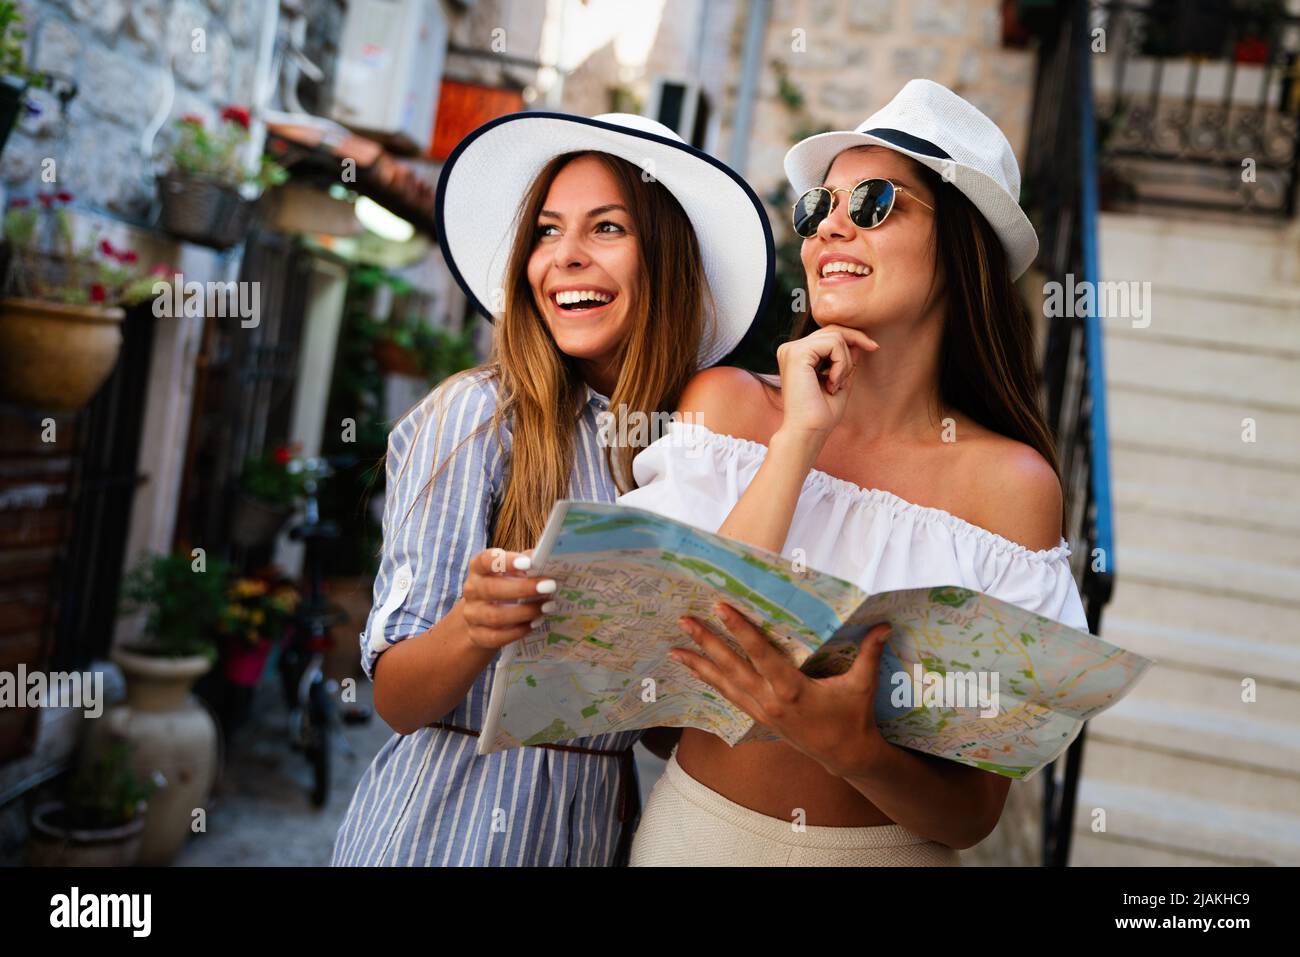 Happy young women with map in city. Travel tourist people fun concept. Stock Photo